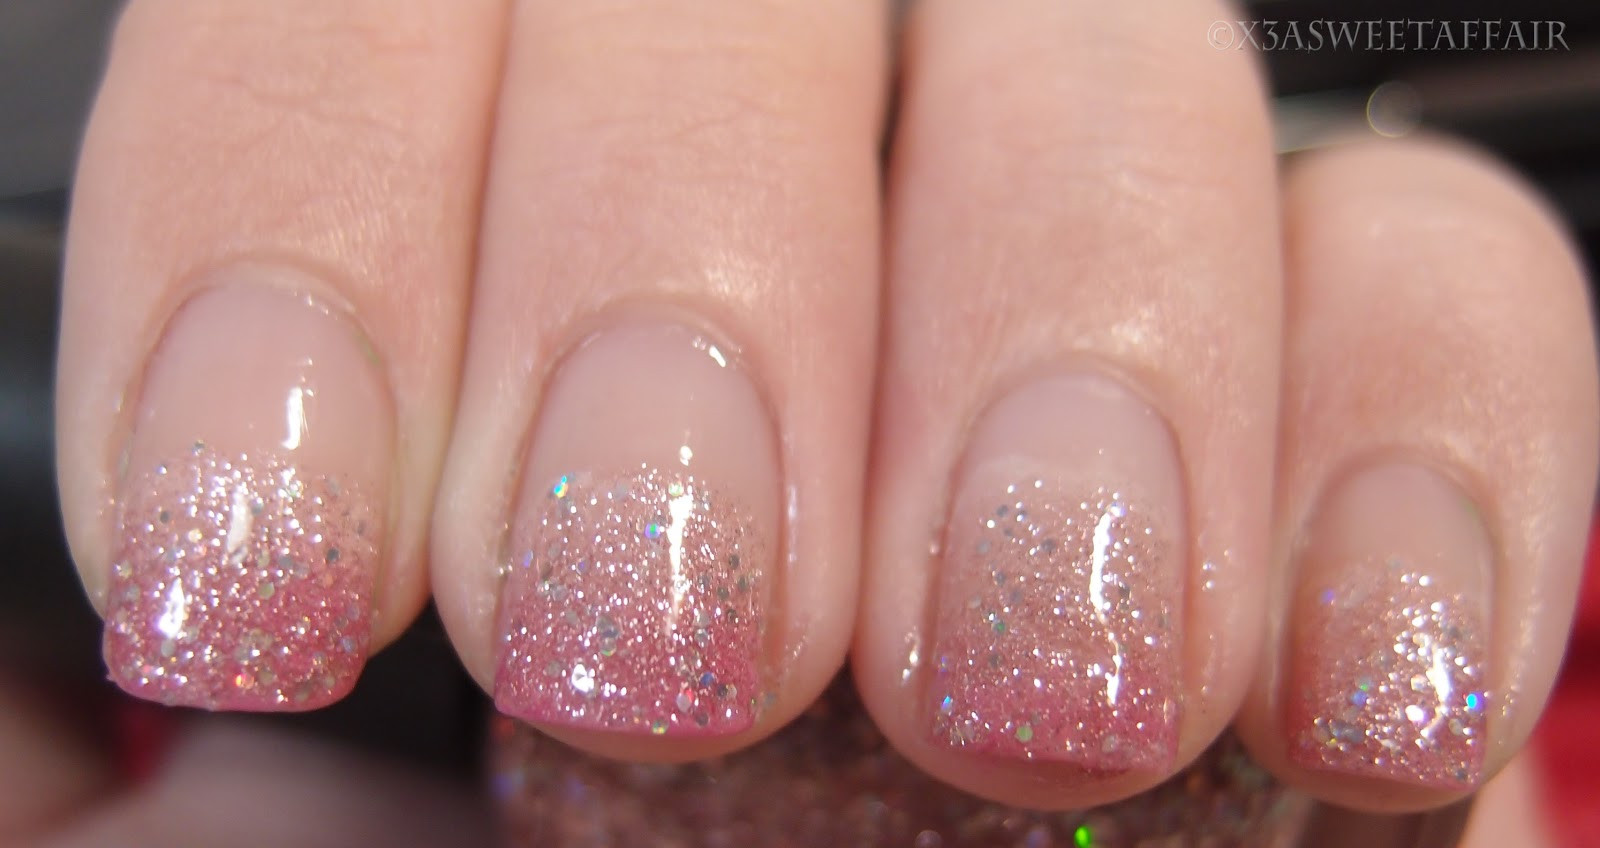 Ombre Nails Glitter
 x3ASweetAffair Naturally Nails Pink ombre glitter